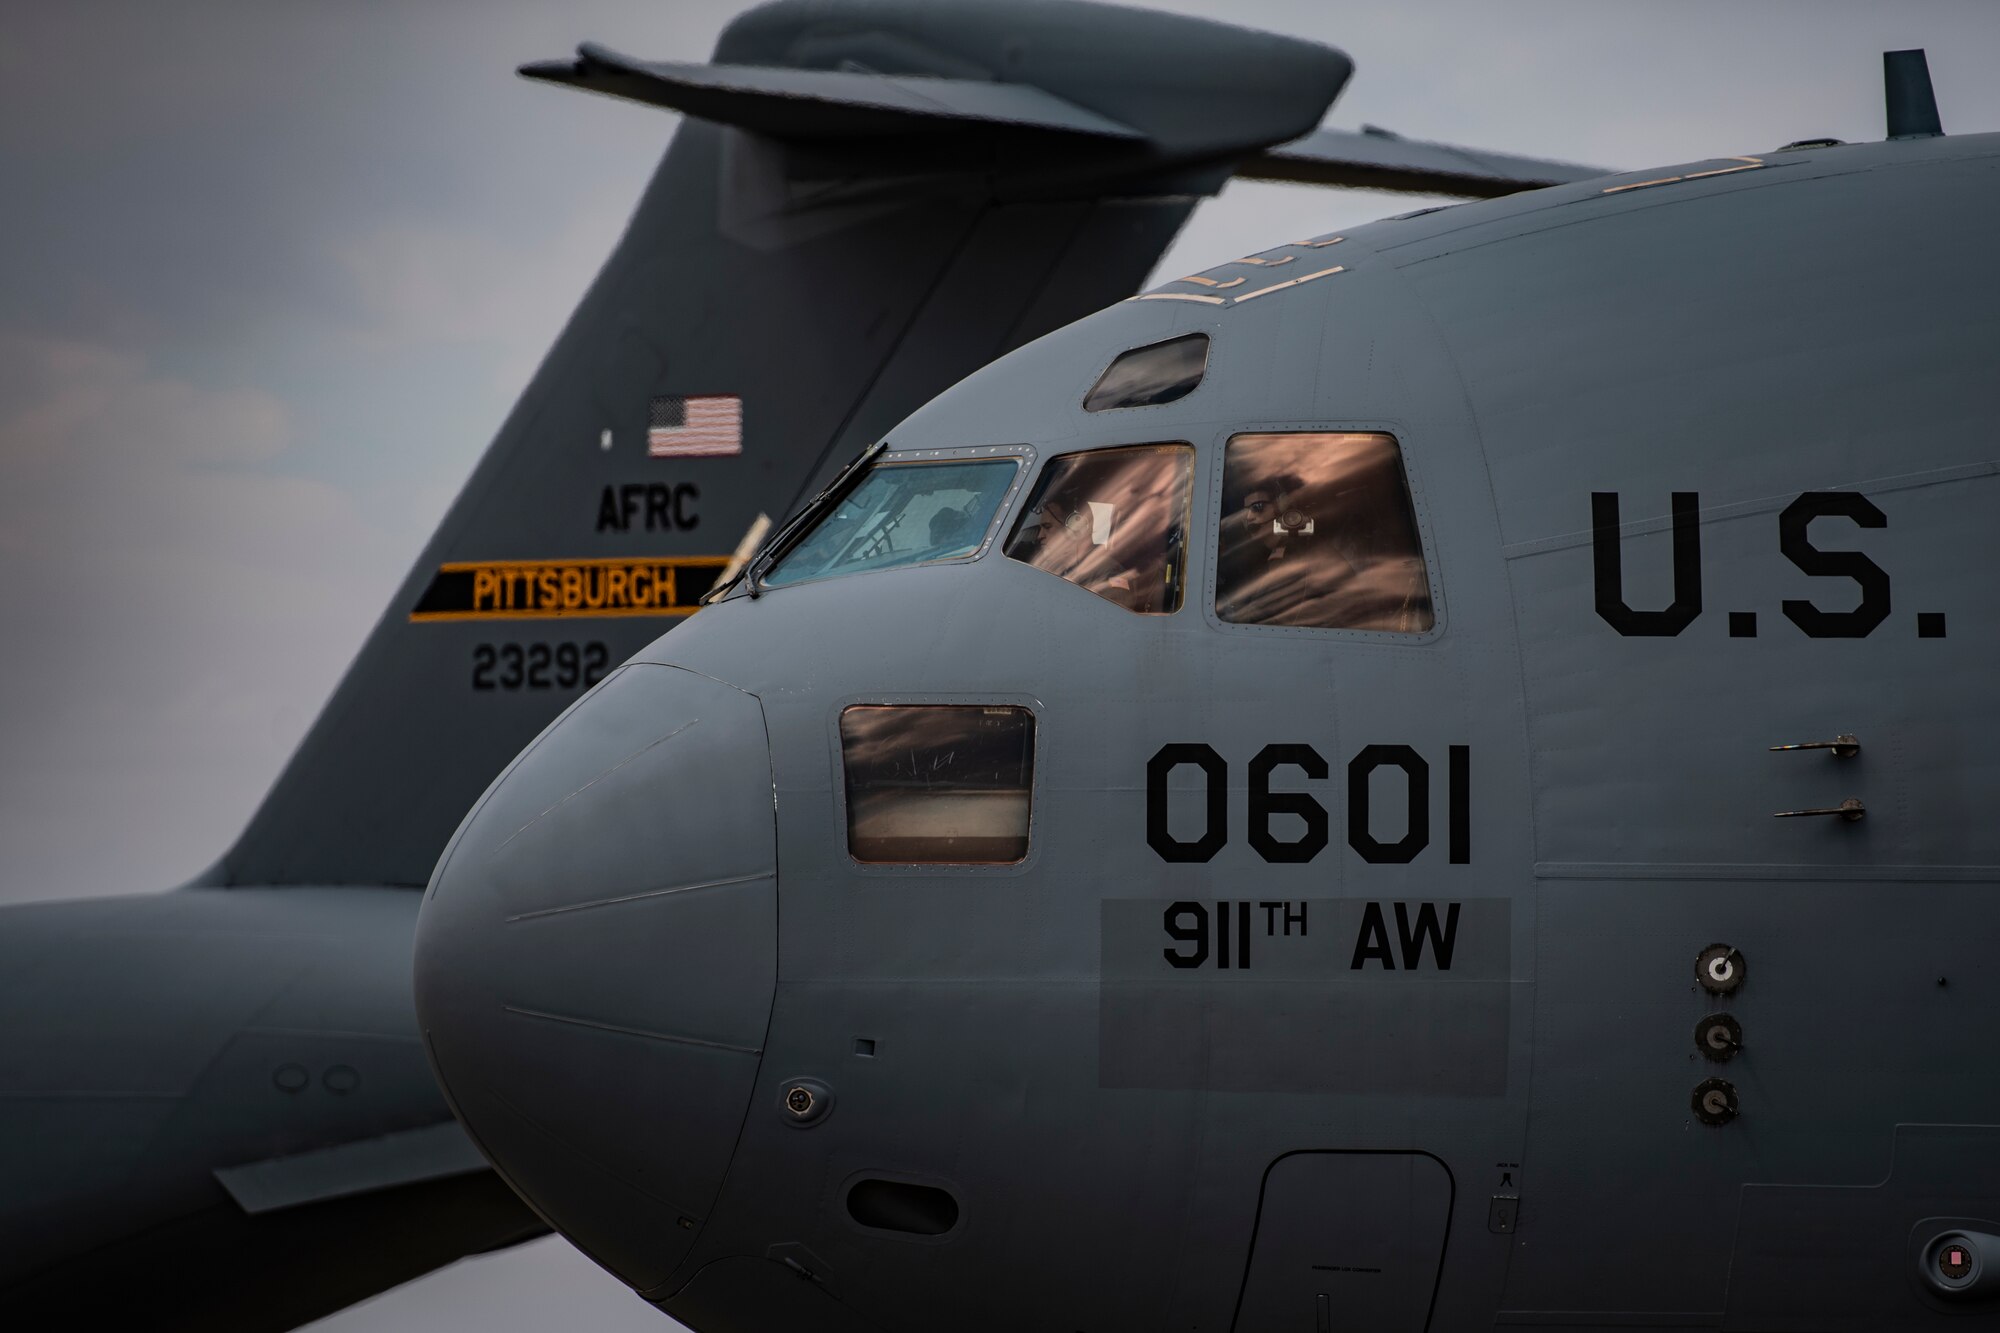 911th Airlift Wing aircrew members prepare to transport mobilized Airmen to Joint Base Mcguire-Dix-Lakehurst, New Jersey in support of the COVID-19 efforts from the Pittsburgh International Airport Air Reserve Station, Pennsylvania, April 5, 2020.